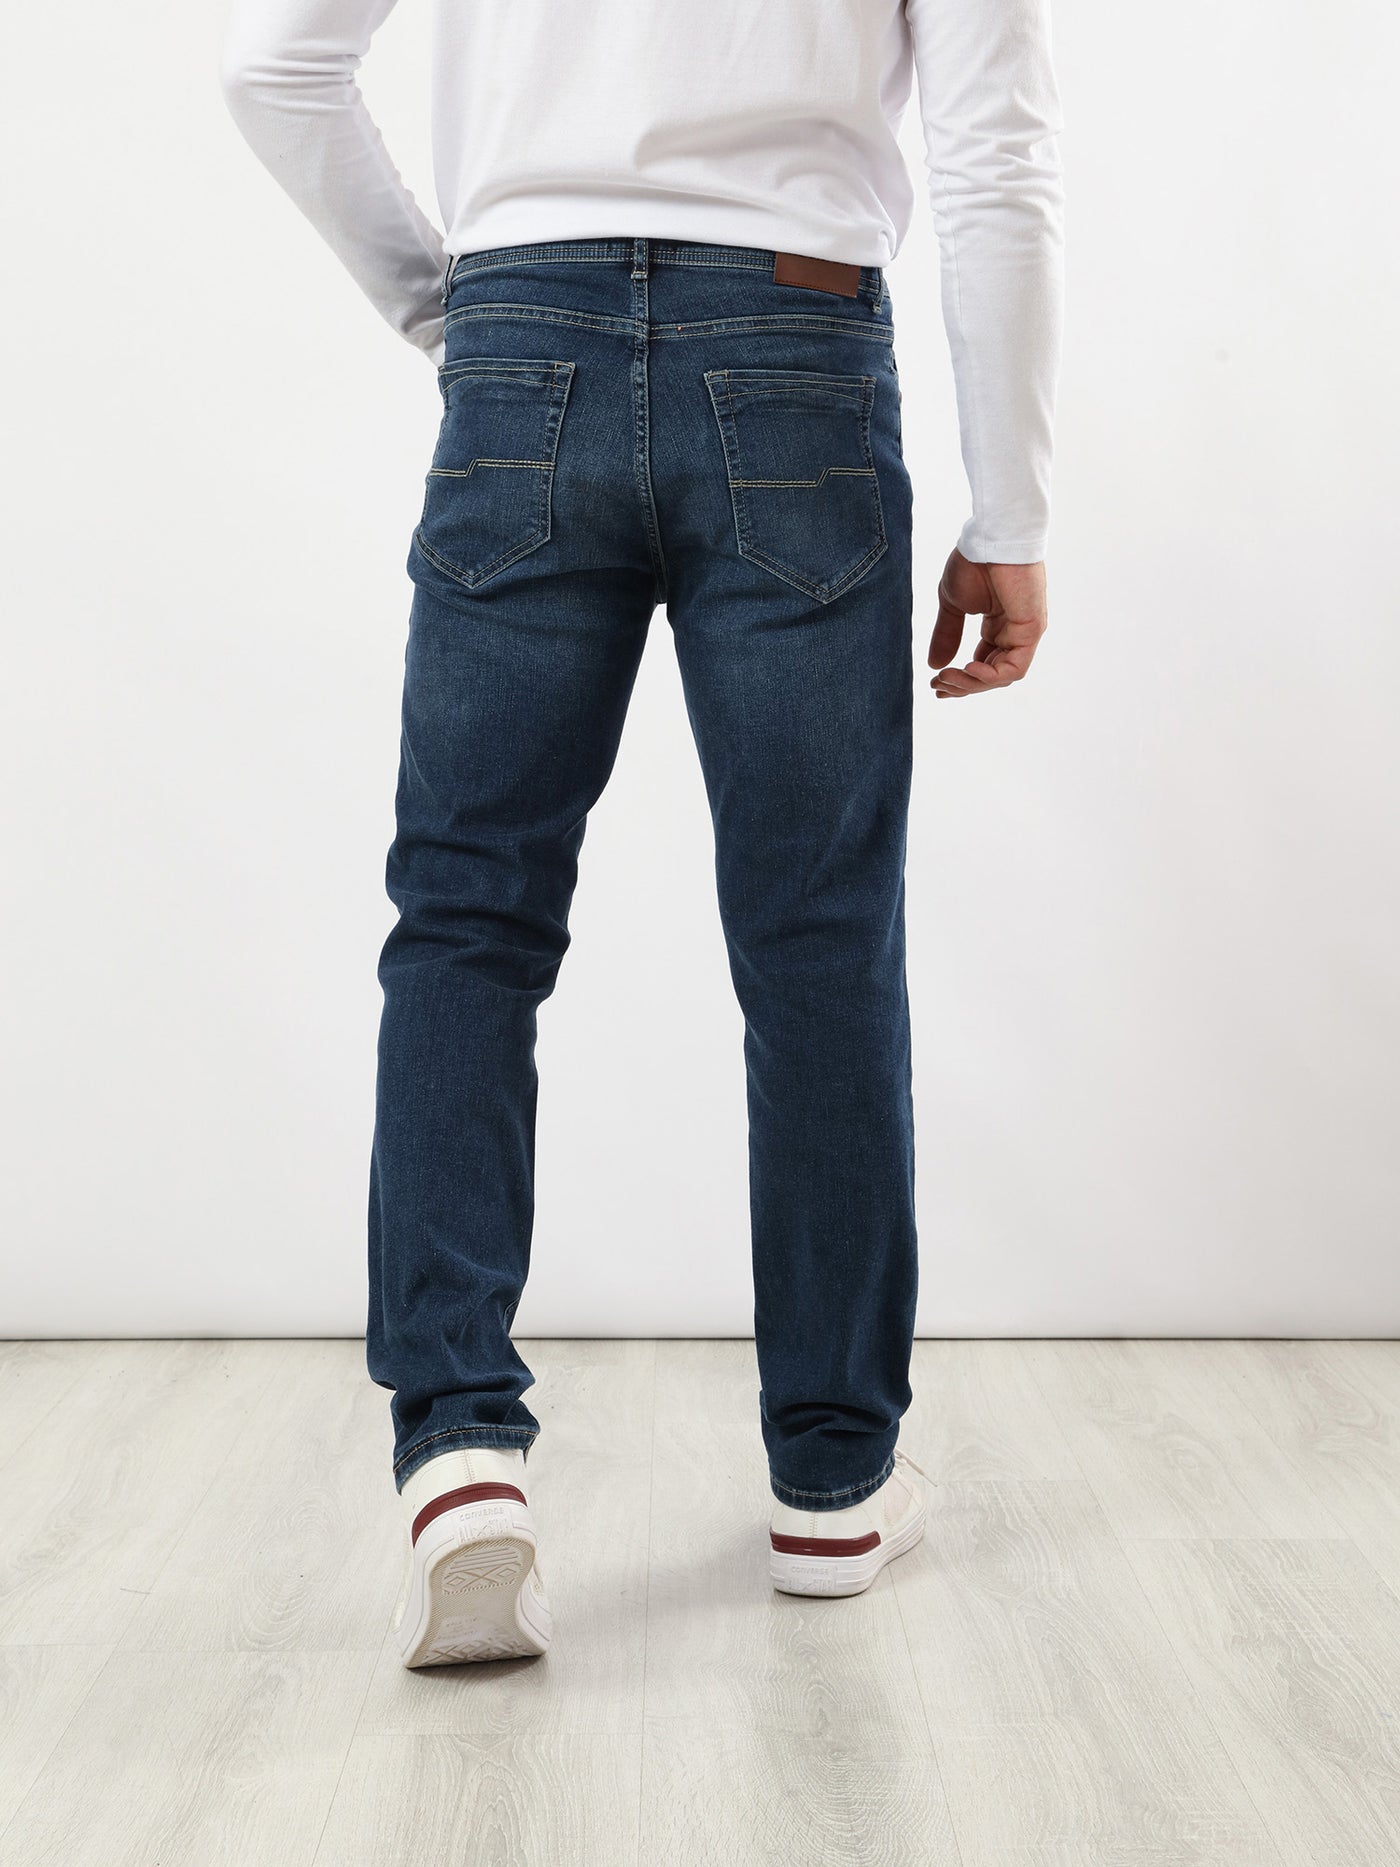 Jeans - Washed Out - Low Waist